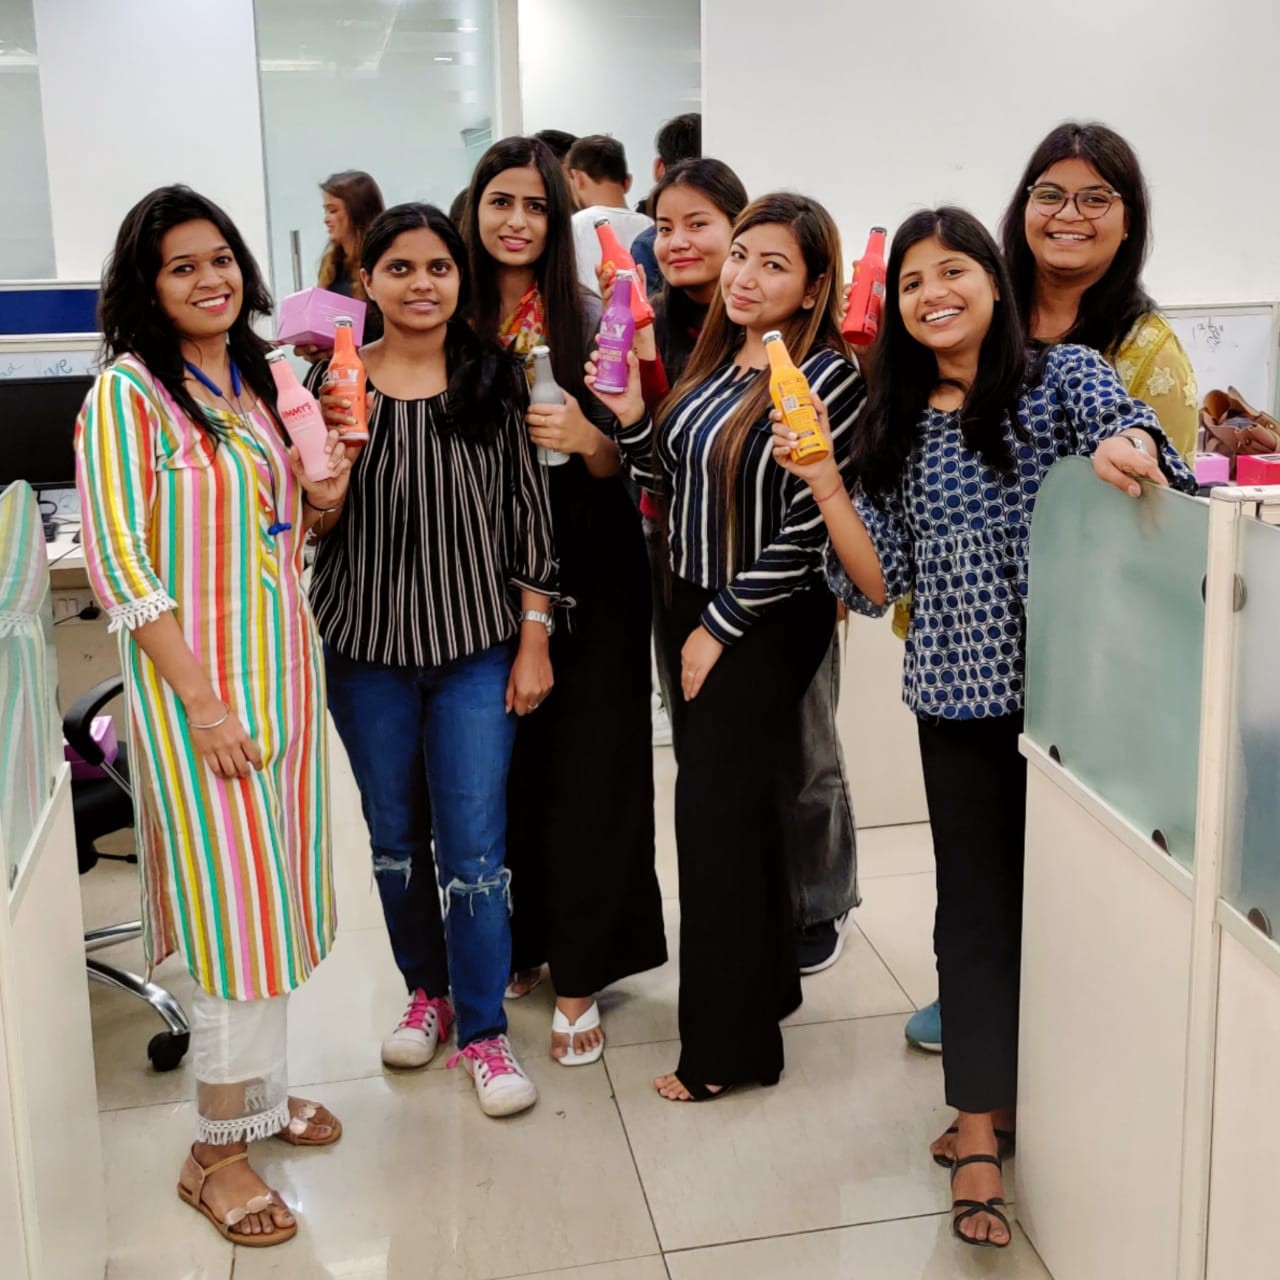 Our Ladies during our office mocktail party !